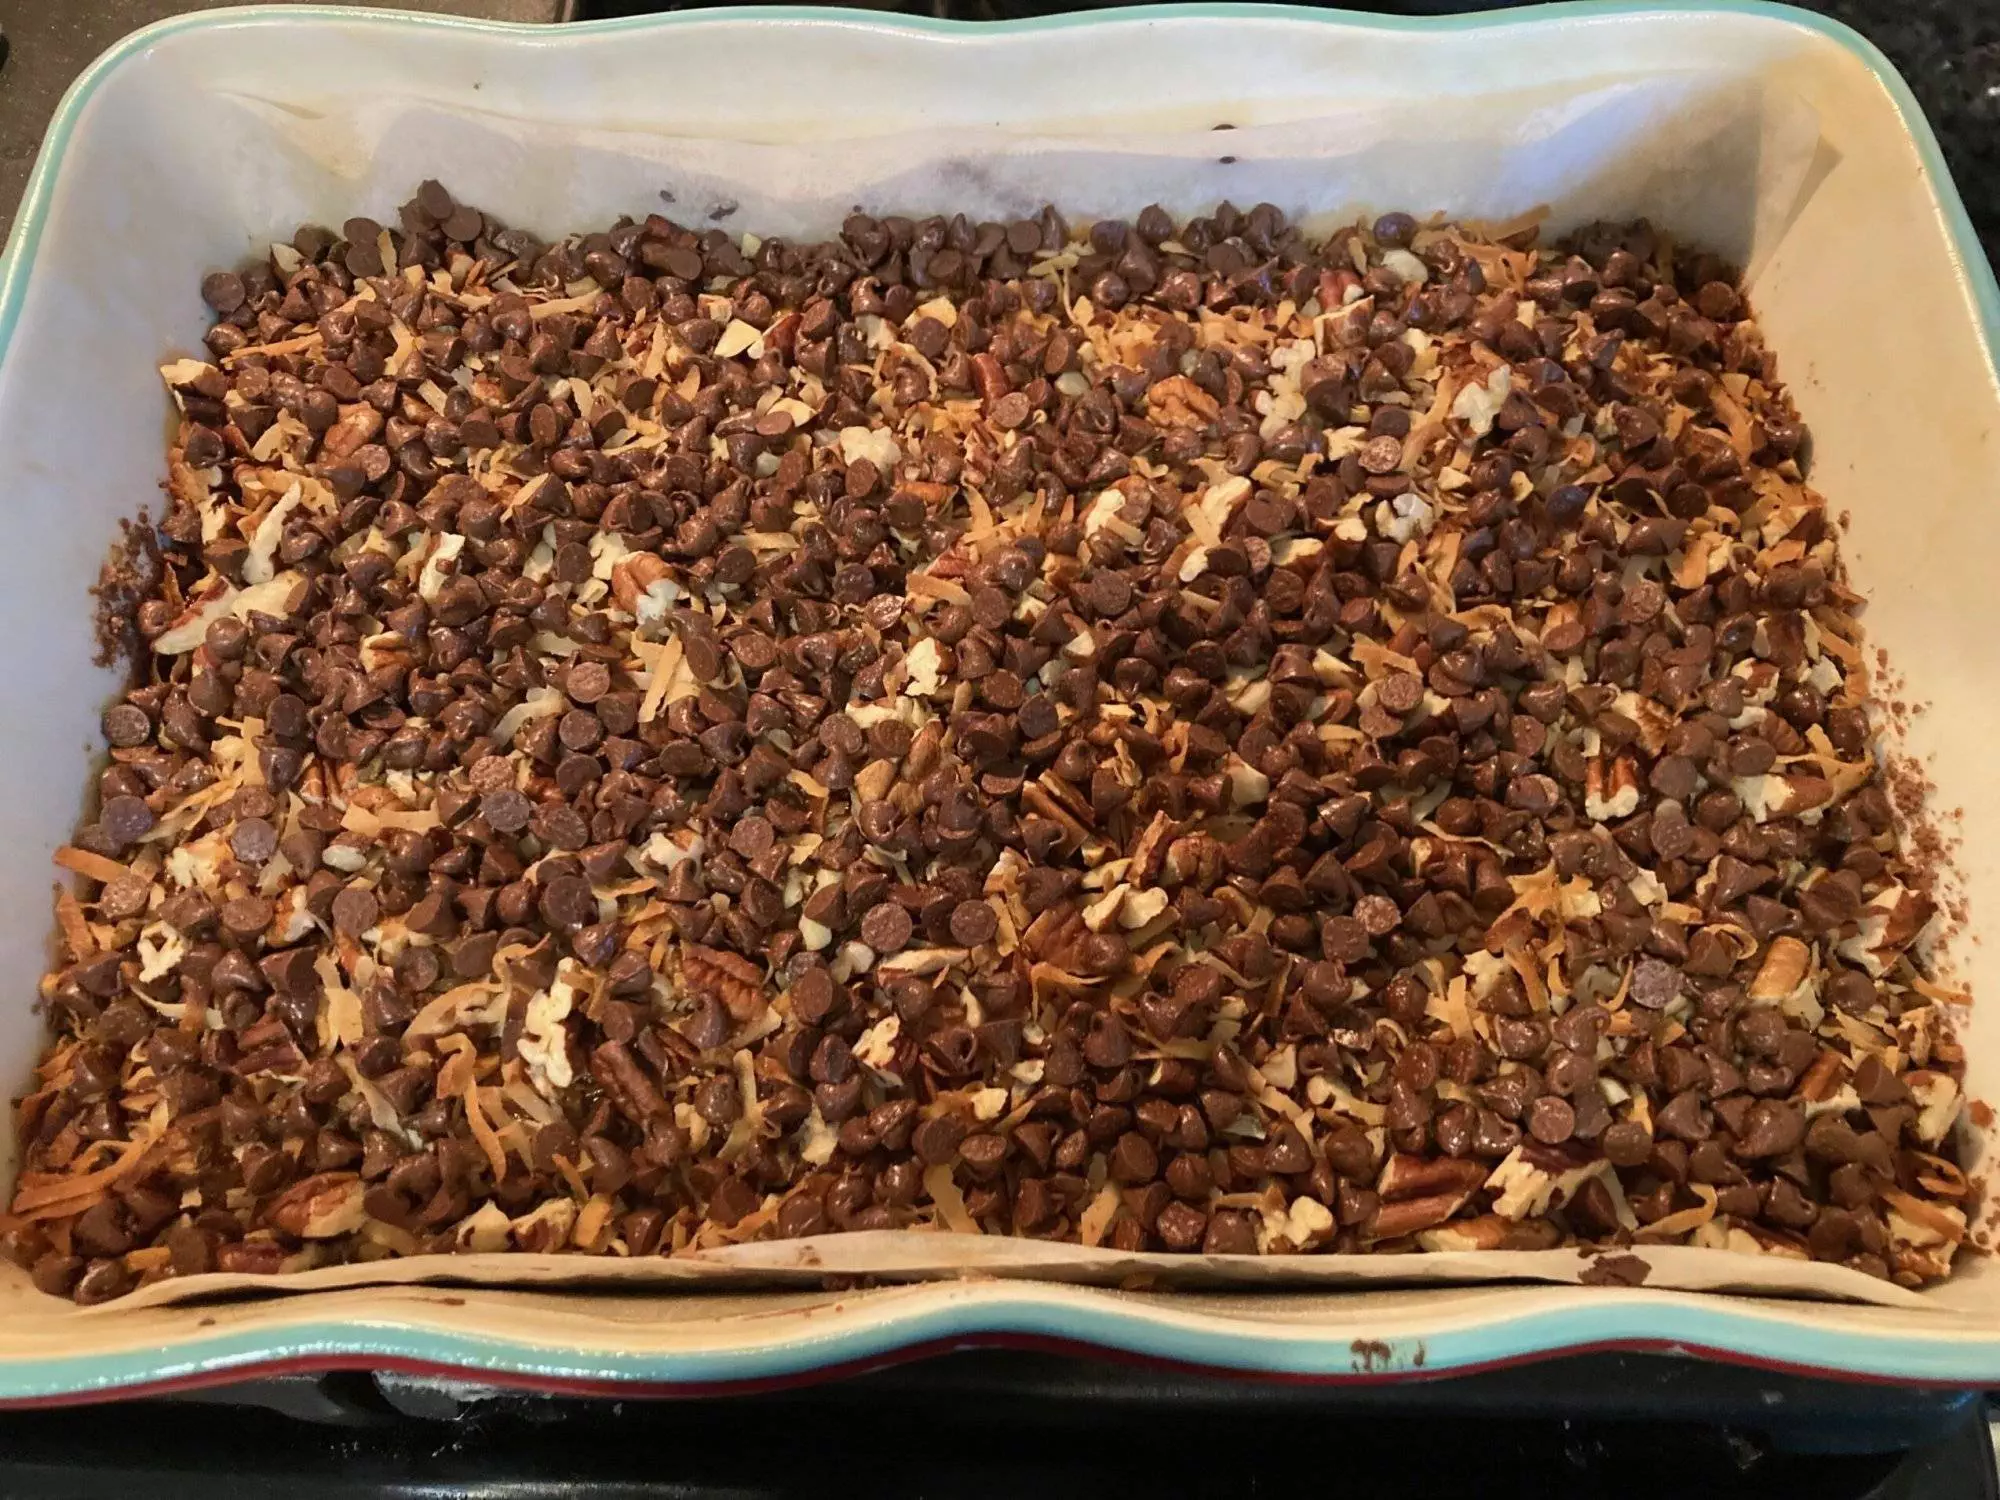 German Chocolate Bars from Scratch from Out of the Box Baking.com